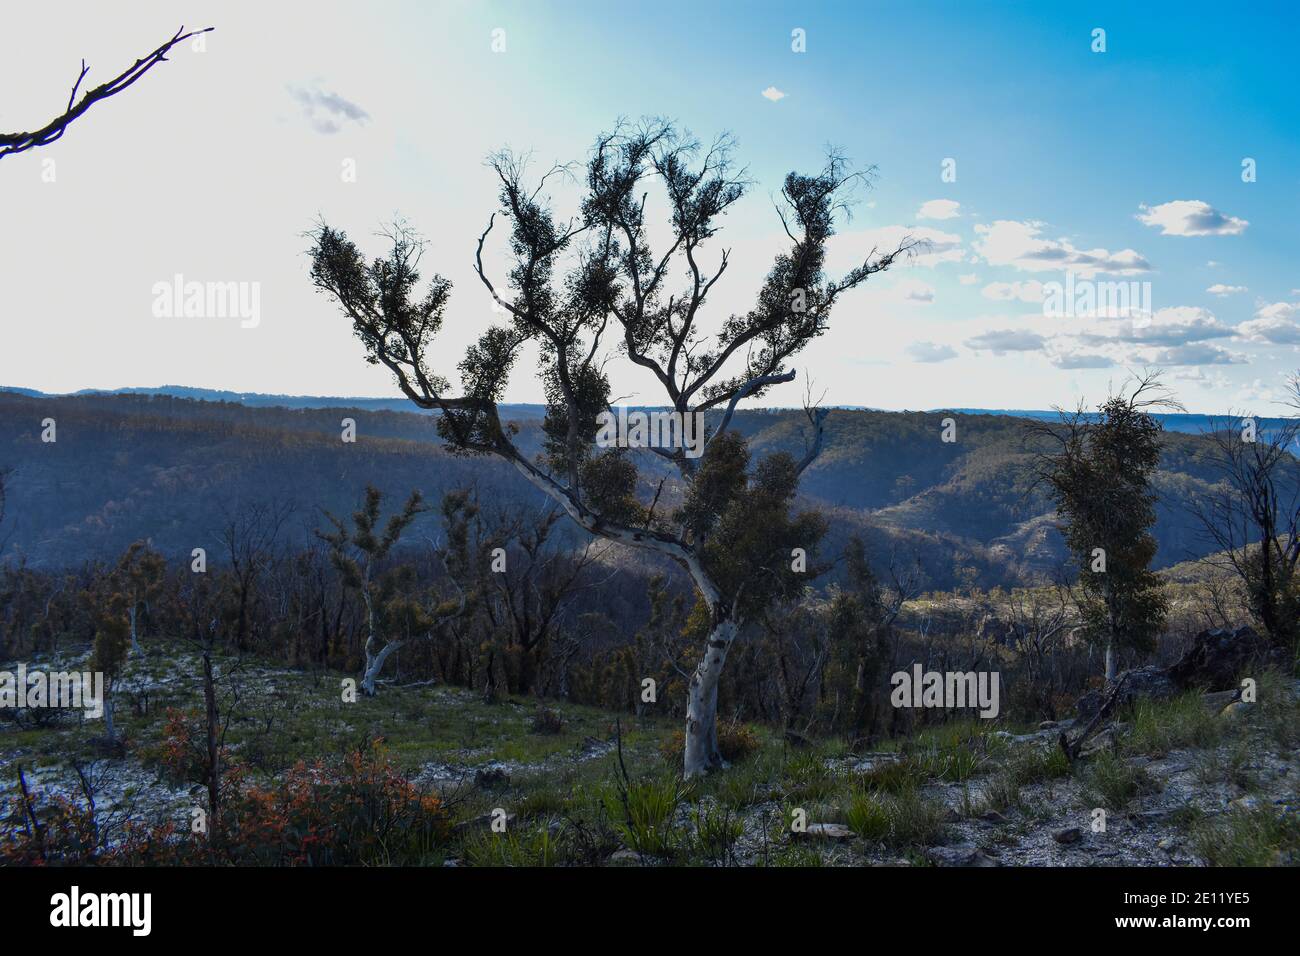 a scraggly tree on top of a mountain in teh blue mountains surrounded by Stock Photo